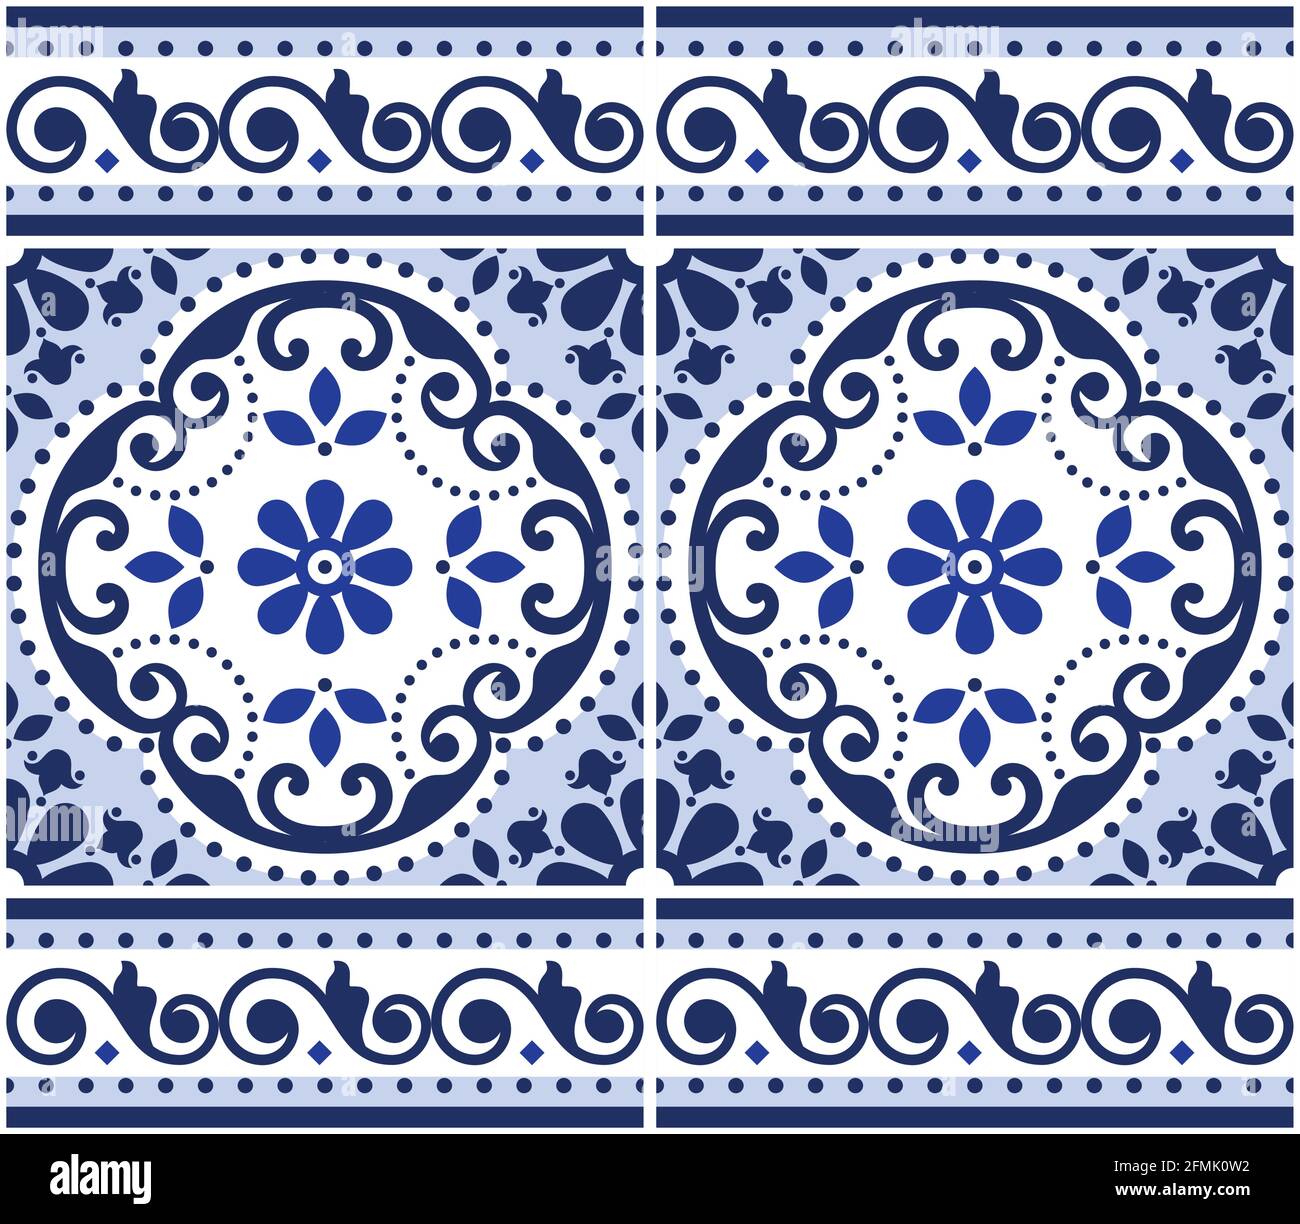 Lisbon Azulejo tiles seamless vector pattern with frame or border, Portuguese indigo retro design with flowers, swirls and geometric shapes Stock Vector